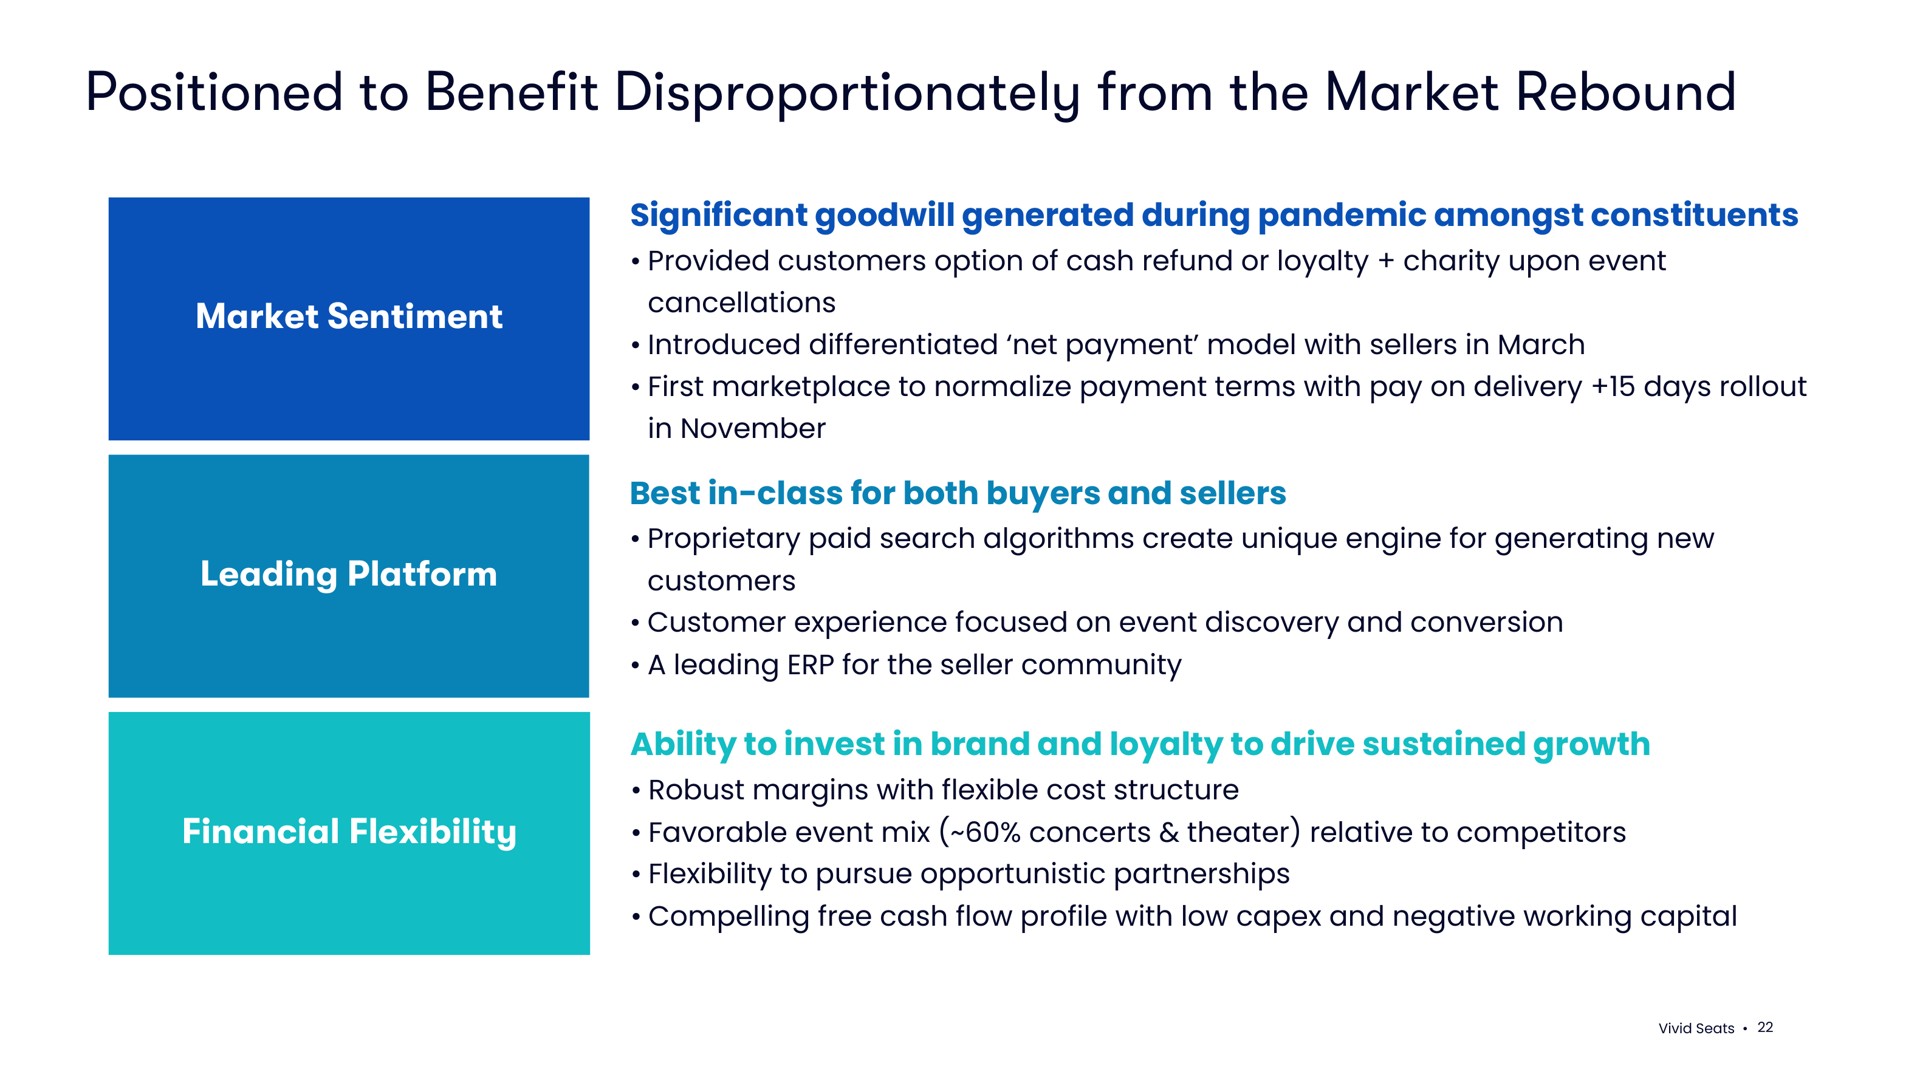 positioned to benefit disproportionately from the market rebound | Vivid Seats